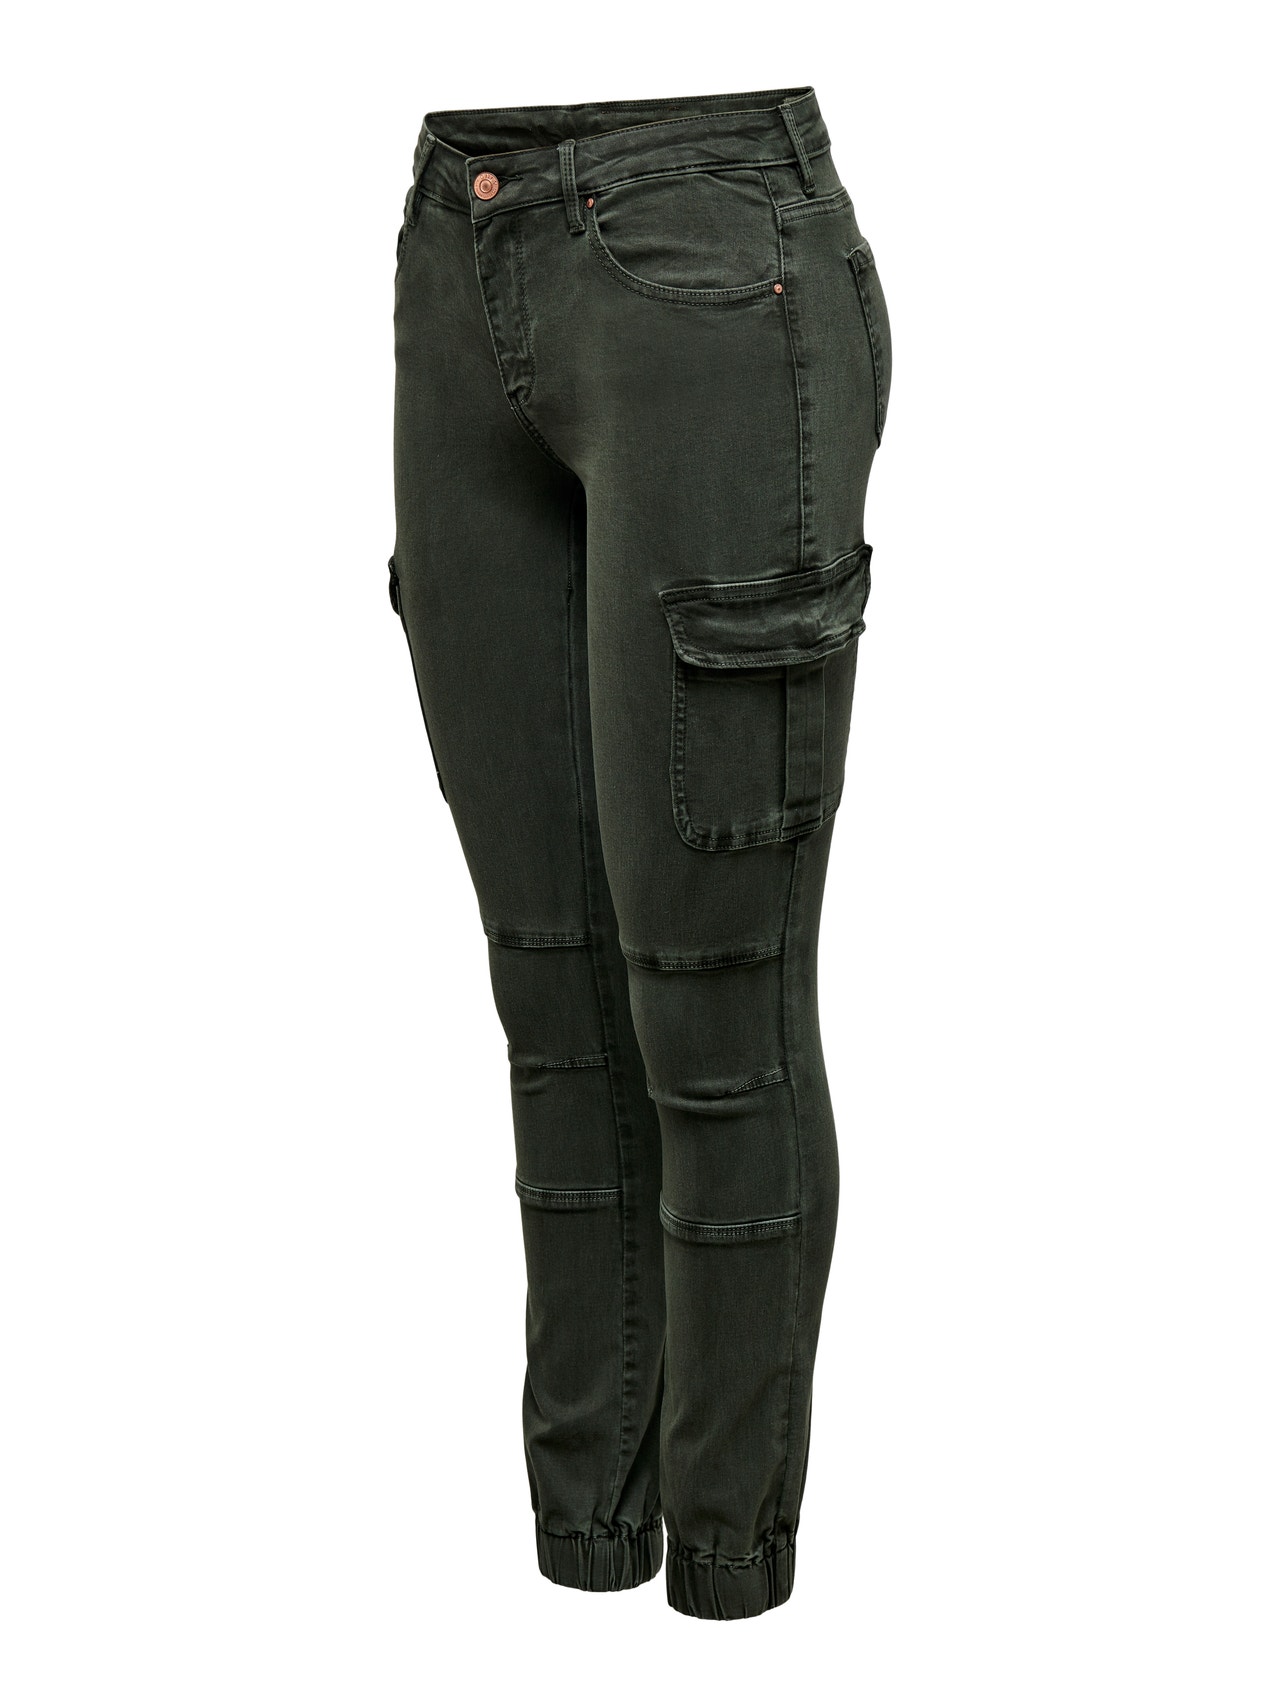 ONLY Cargo trousers with mid waist -Rosin - 15170889